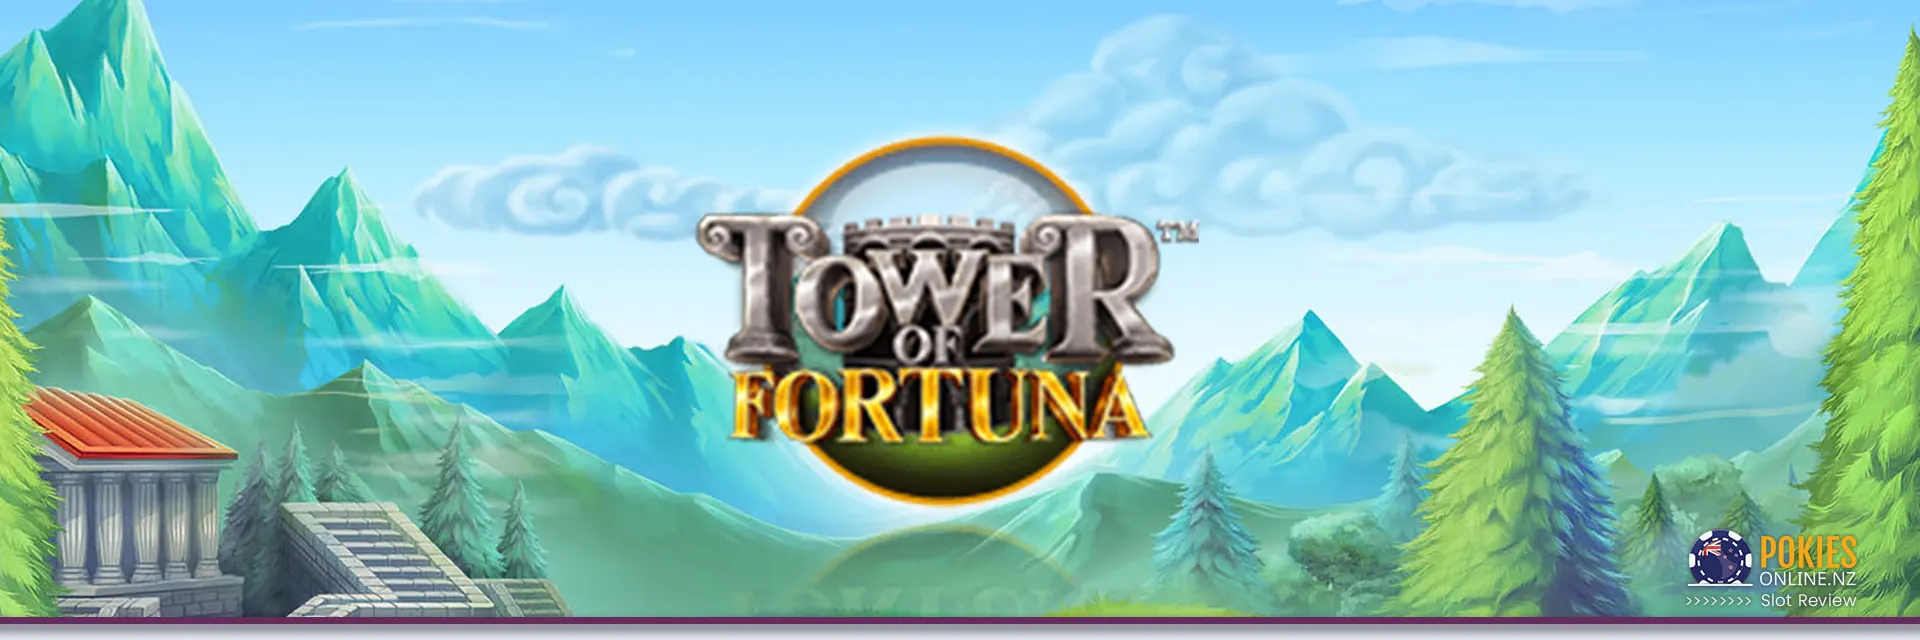 Towers Of Fortuna slot Banner